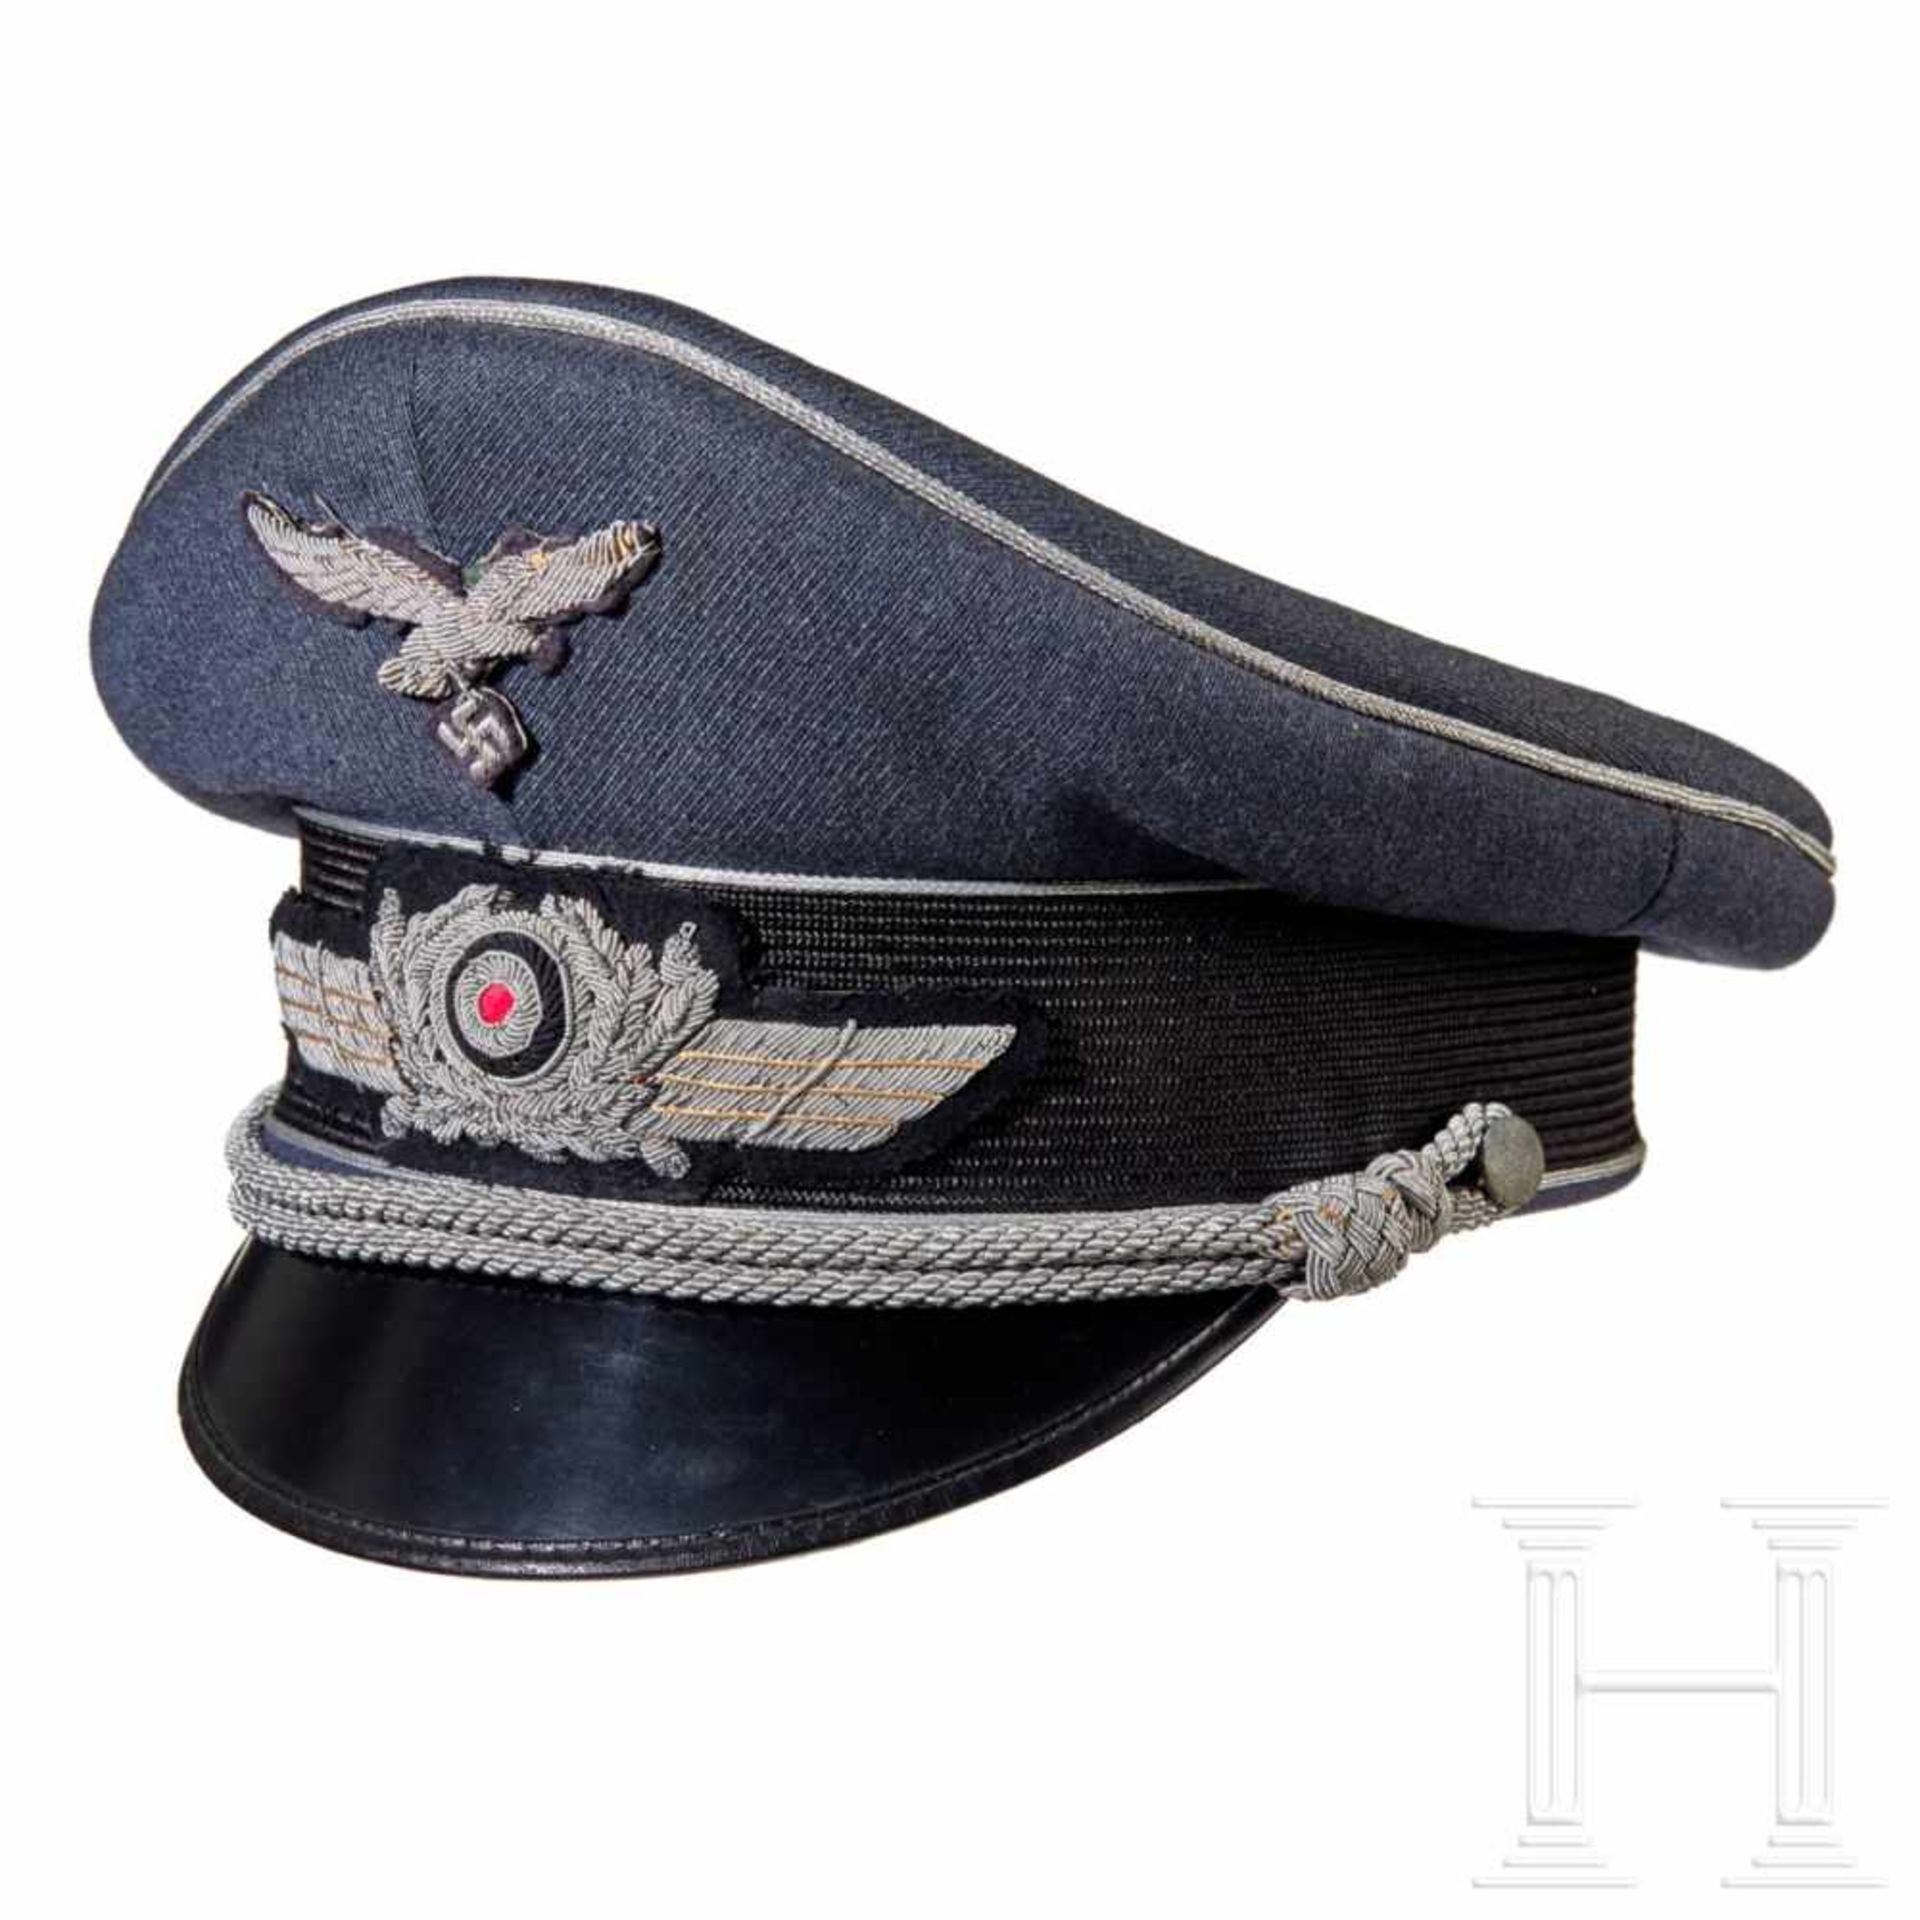 A visor cap for officers of the LuftwaffeBlue-grey finely ribbed tricot wool body with black